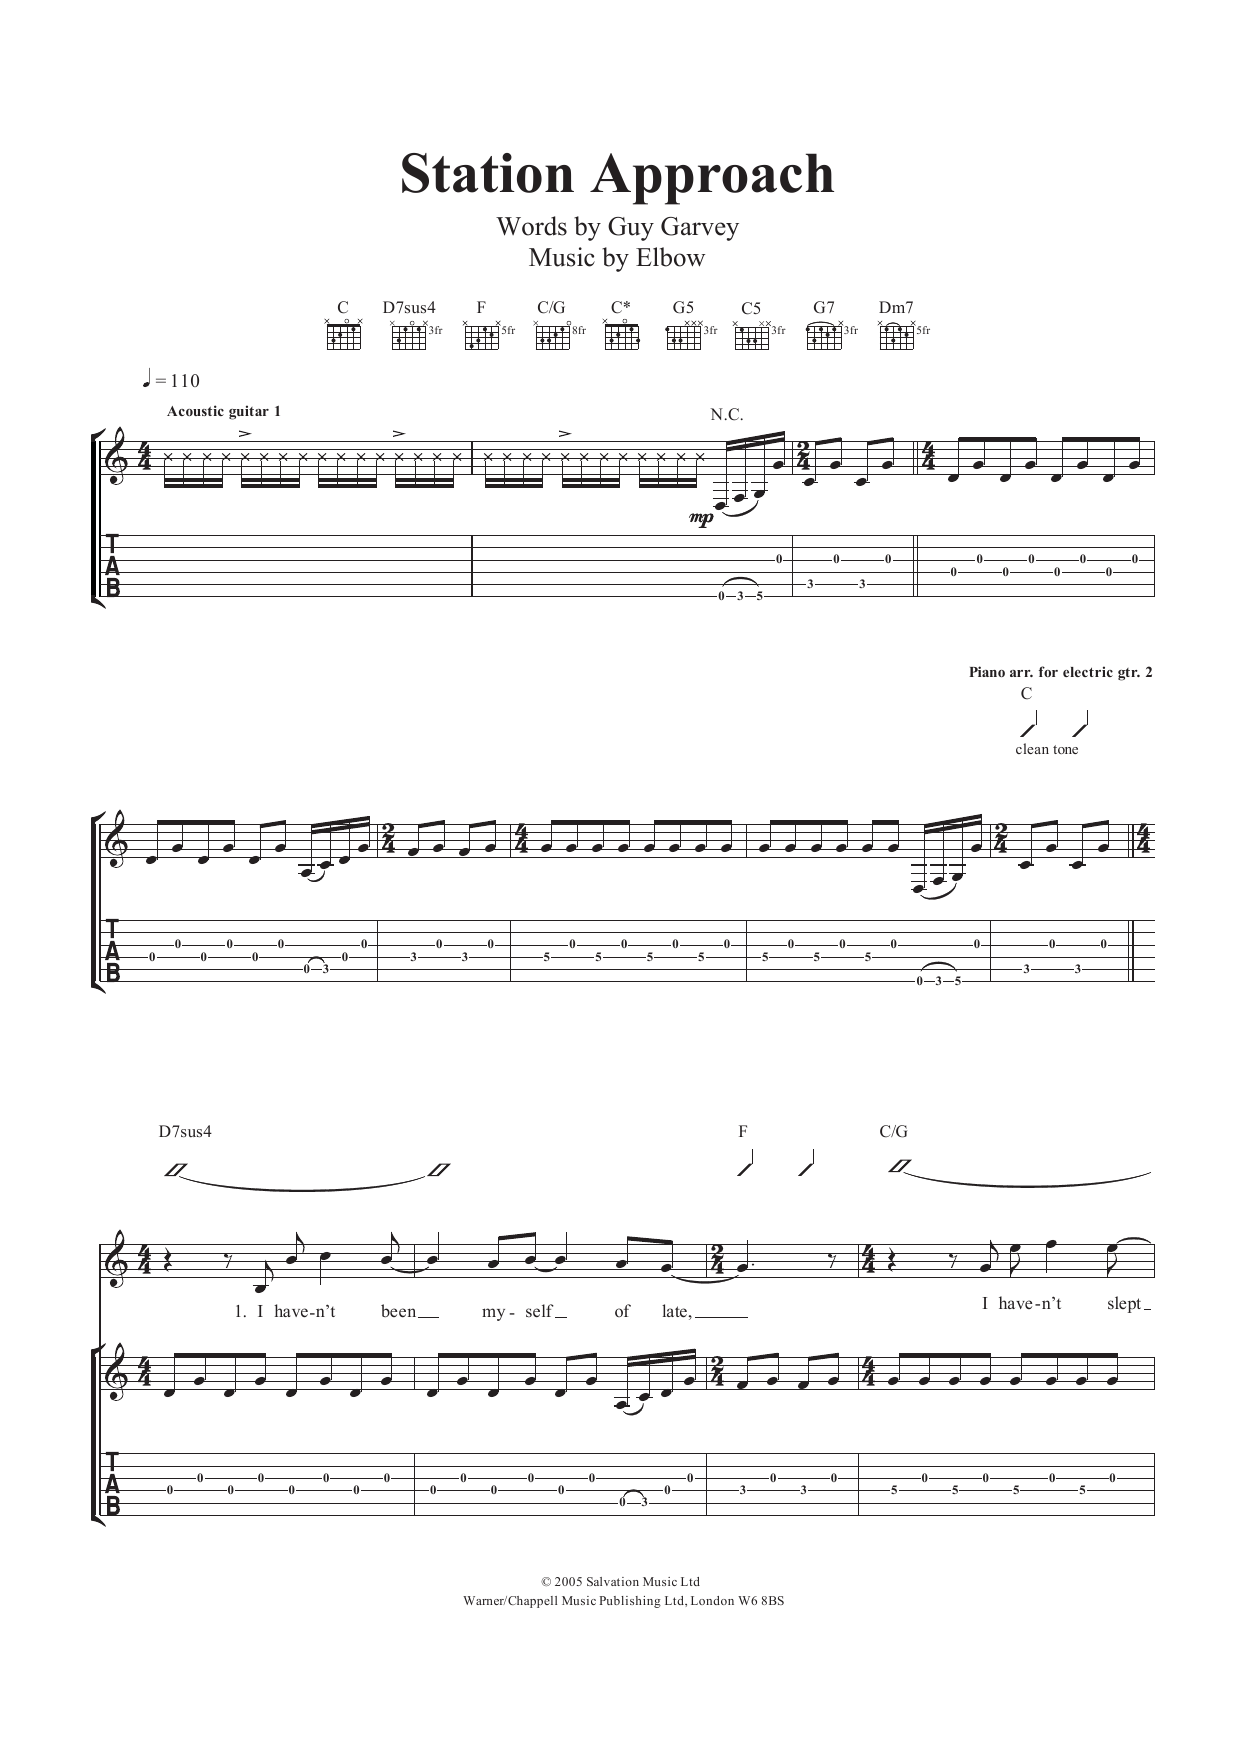 Download Elbow Station Approach Sheet Music